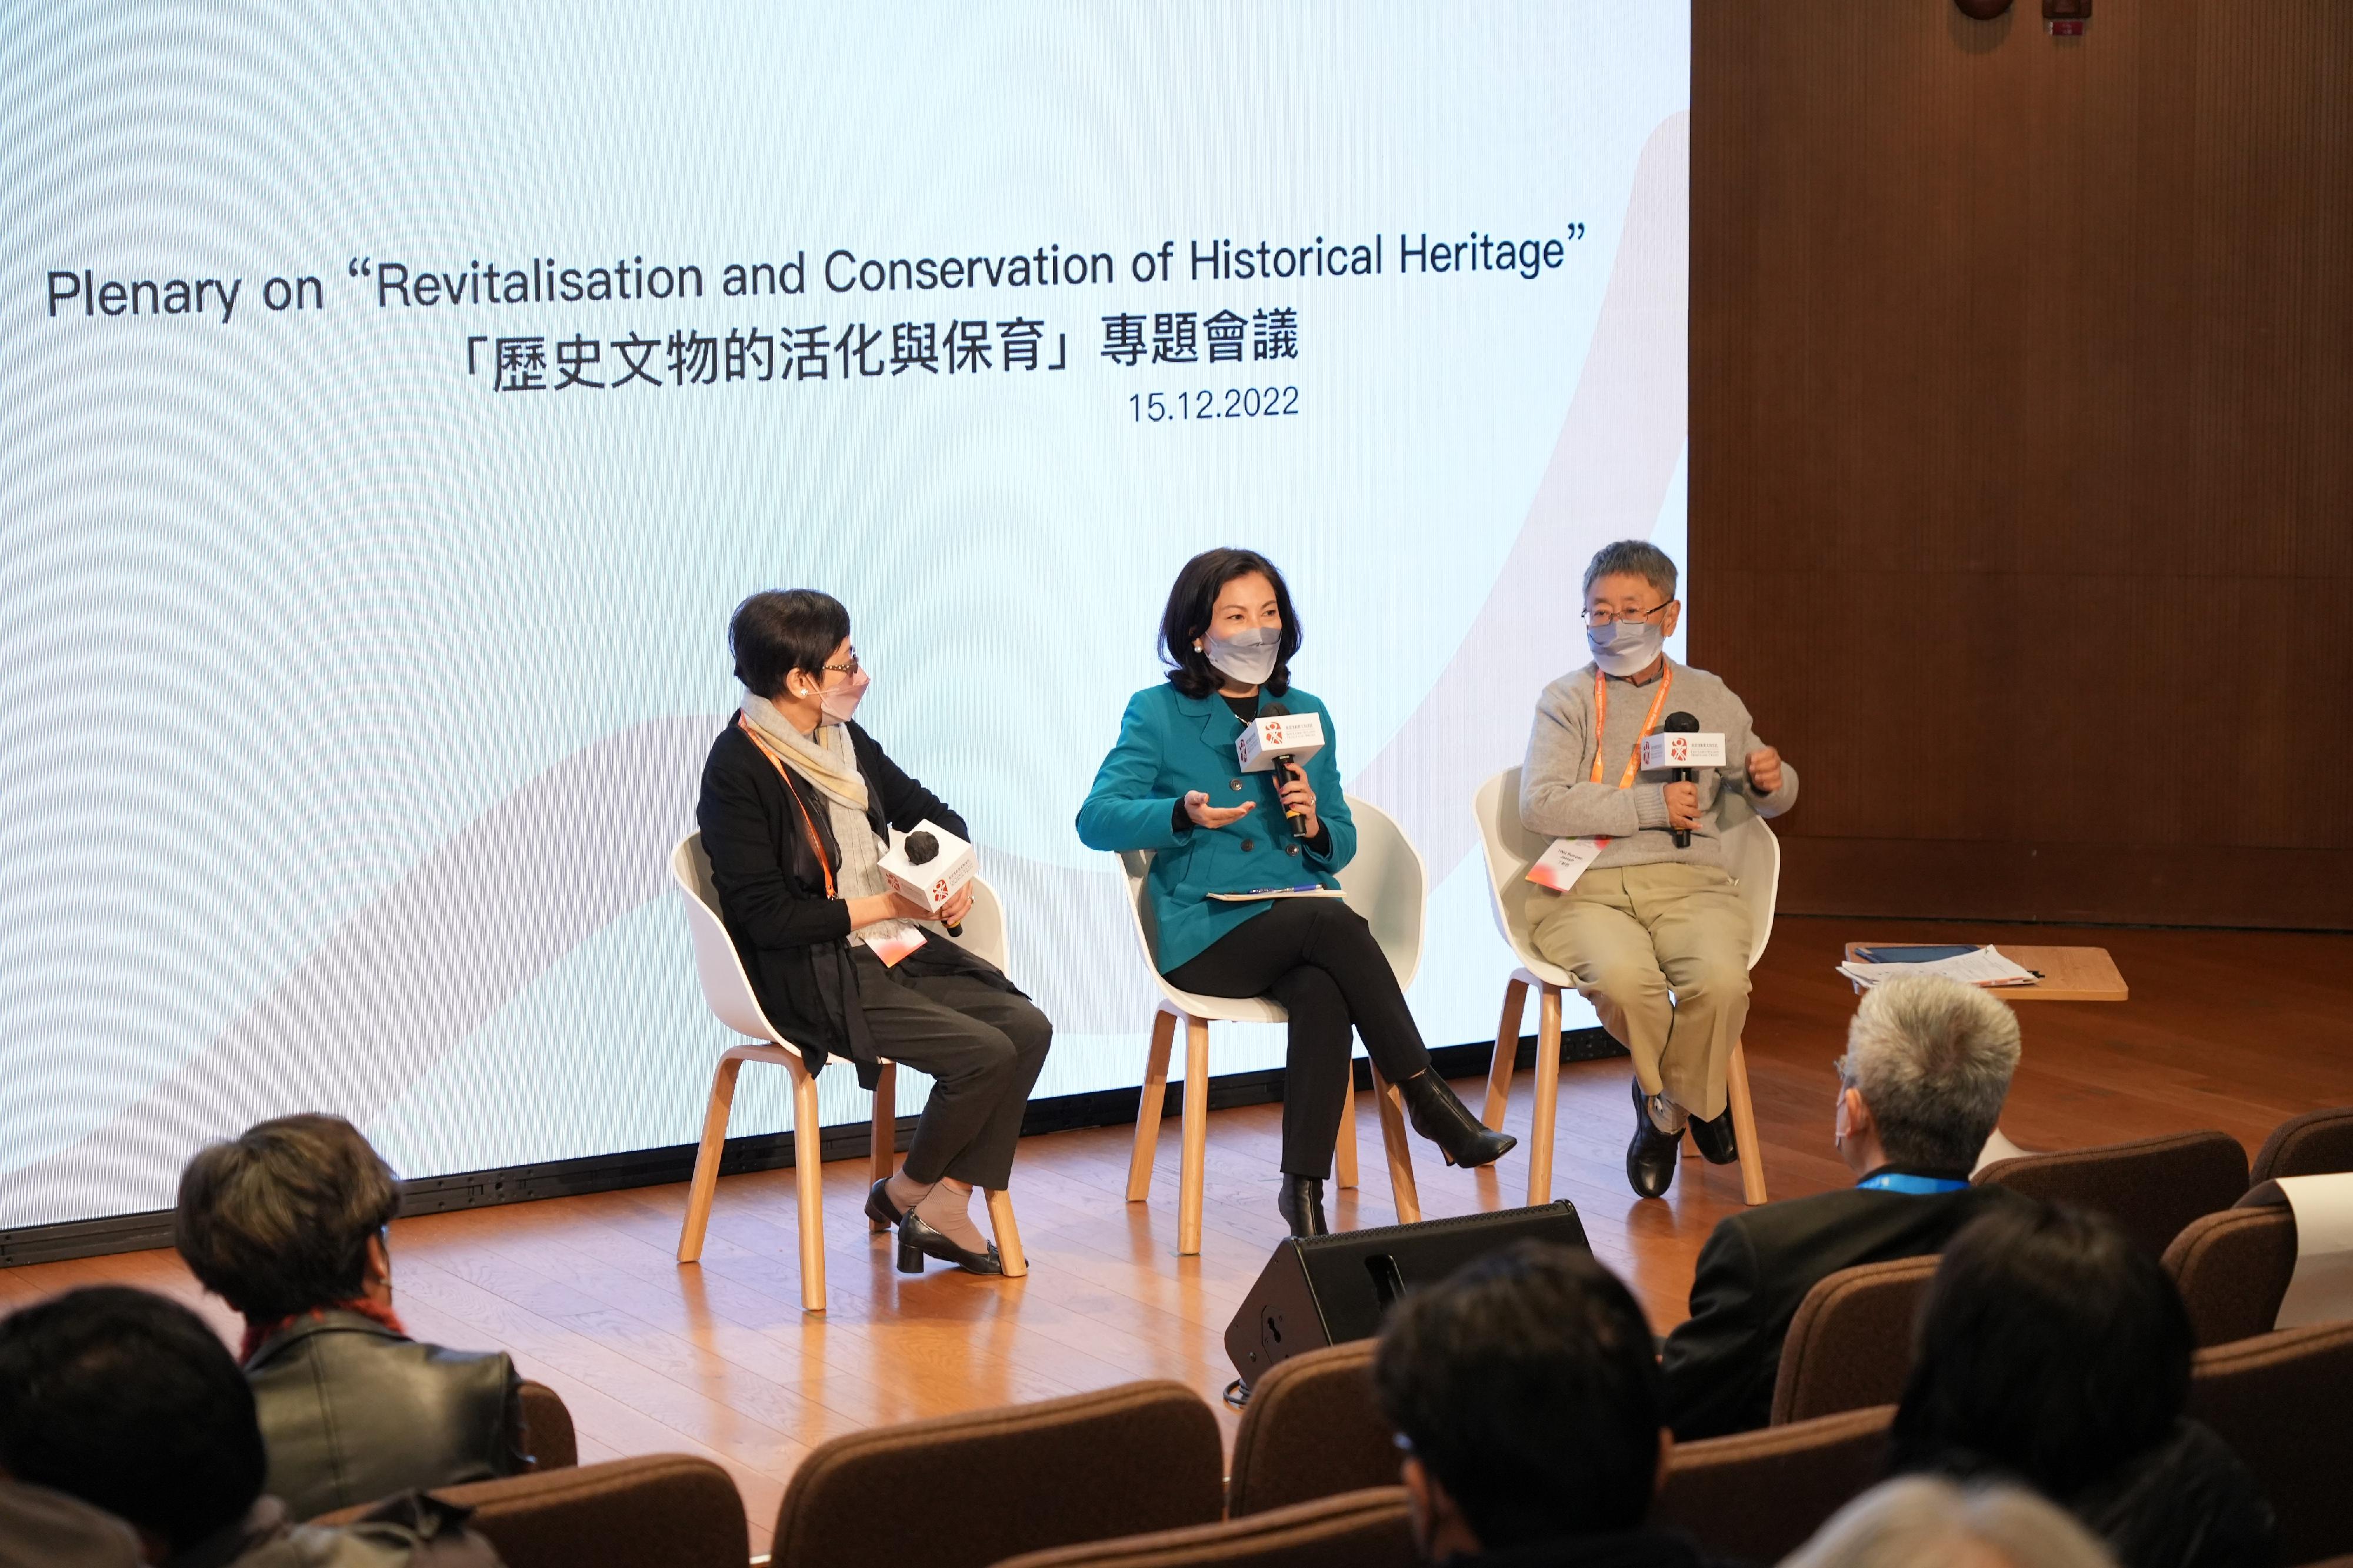 Guest speakers shared their views and experiences in historical heritage at the Plenary on "Revitalisation and Conservation of Historical Heritage" today (December 15).